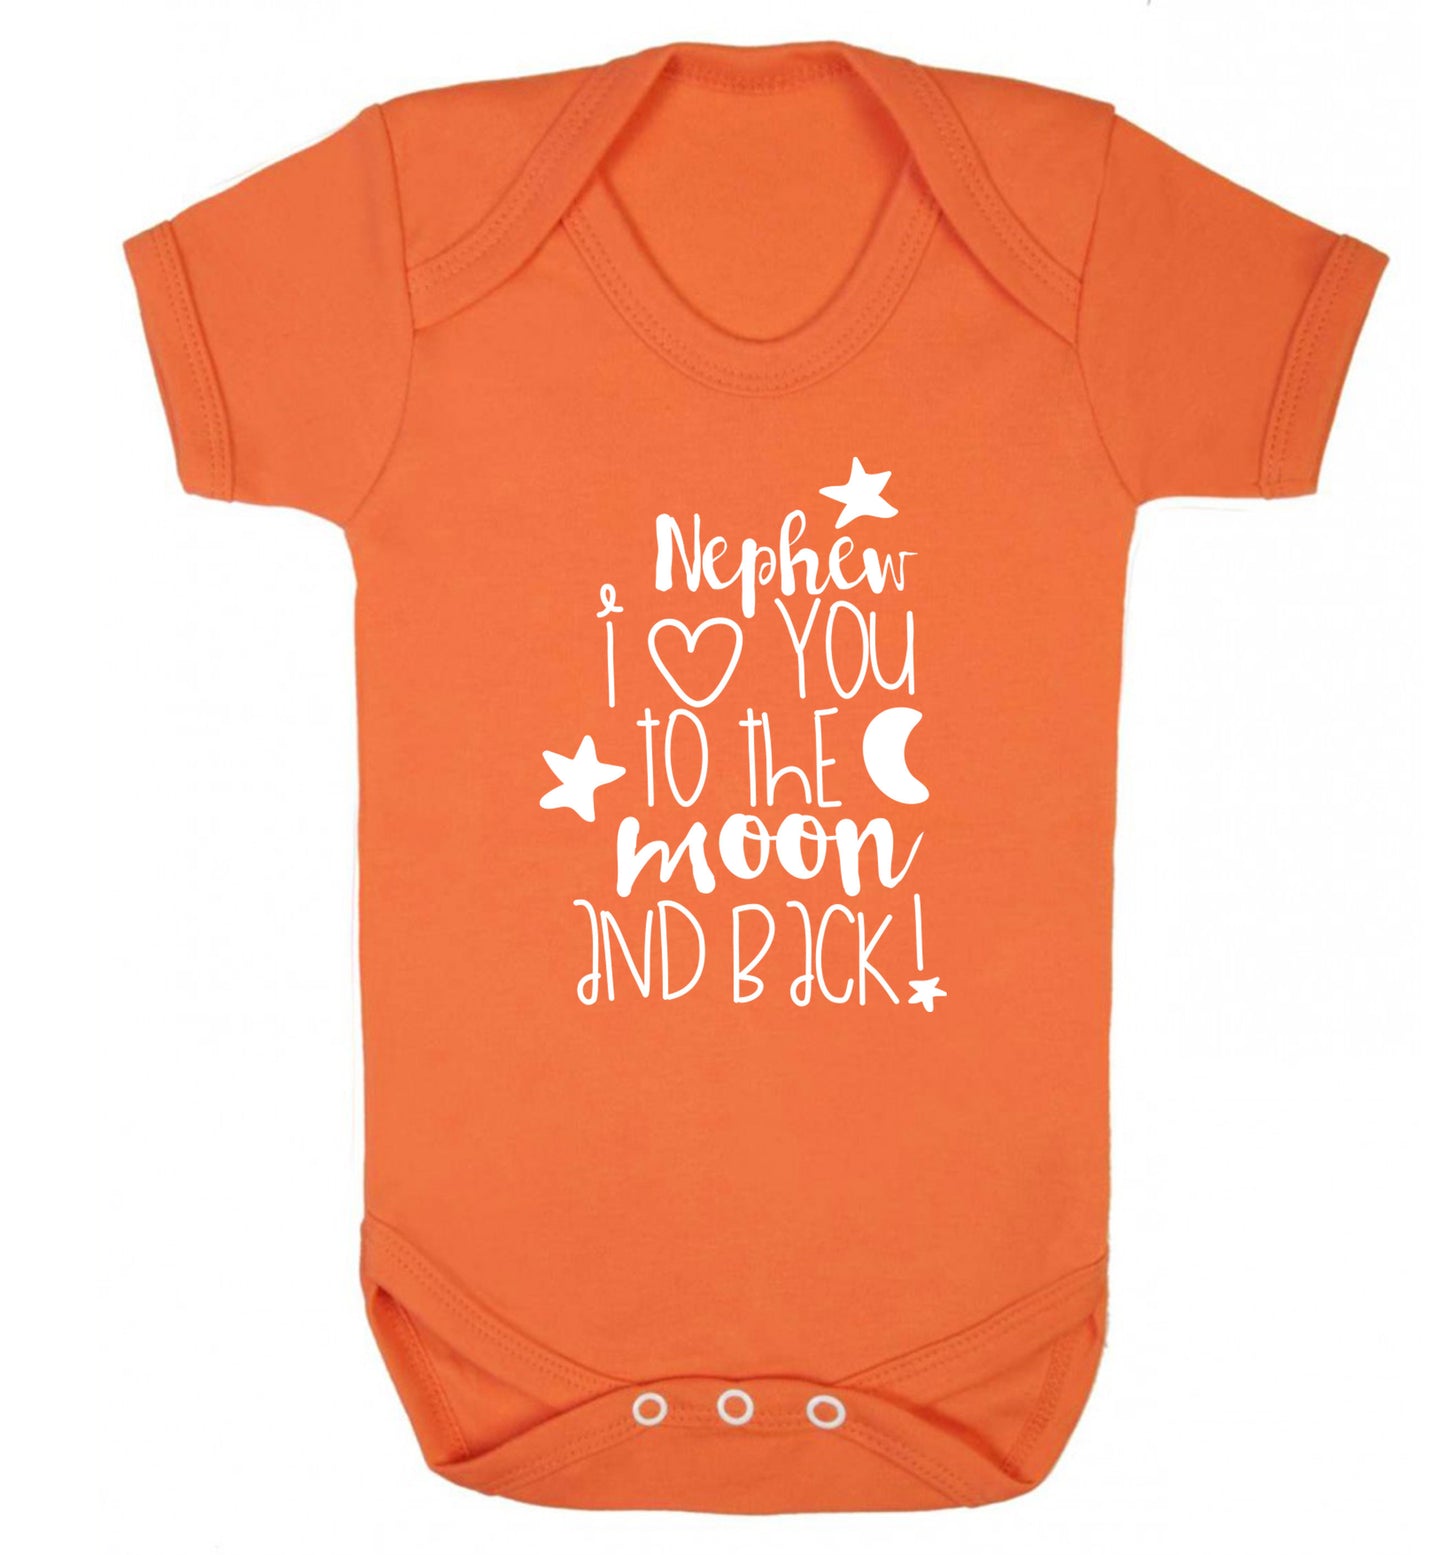 Nephew I love you to the moon and back Baby Vest orange 18-24 months